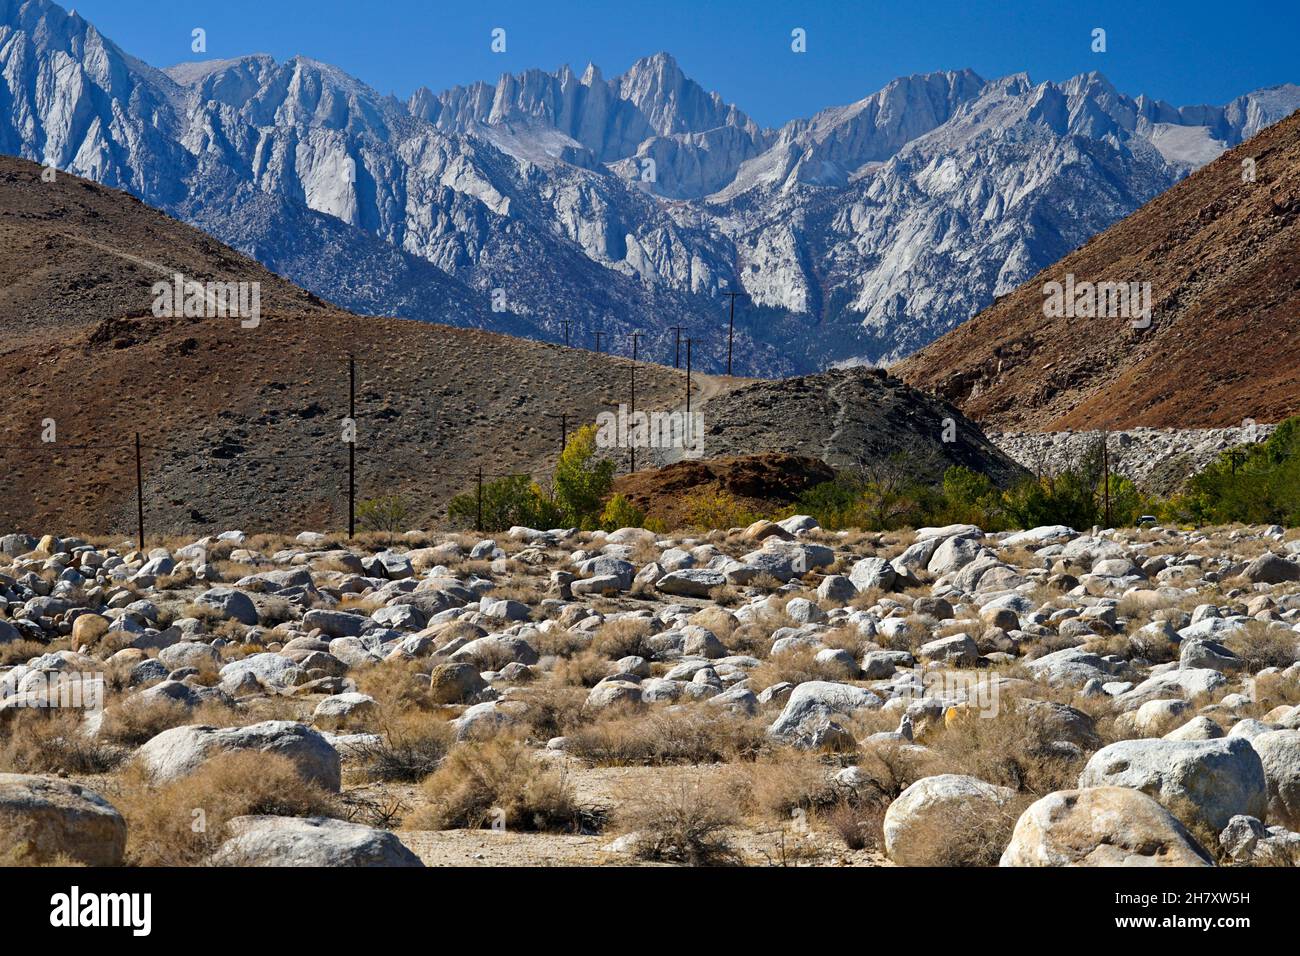 Views of Mt. Whitney from the Owens Valley Stock Photo